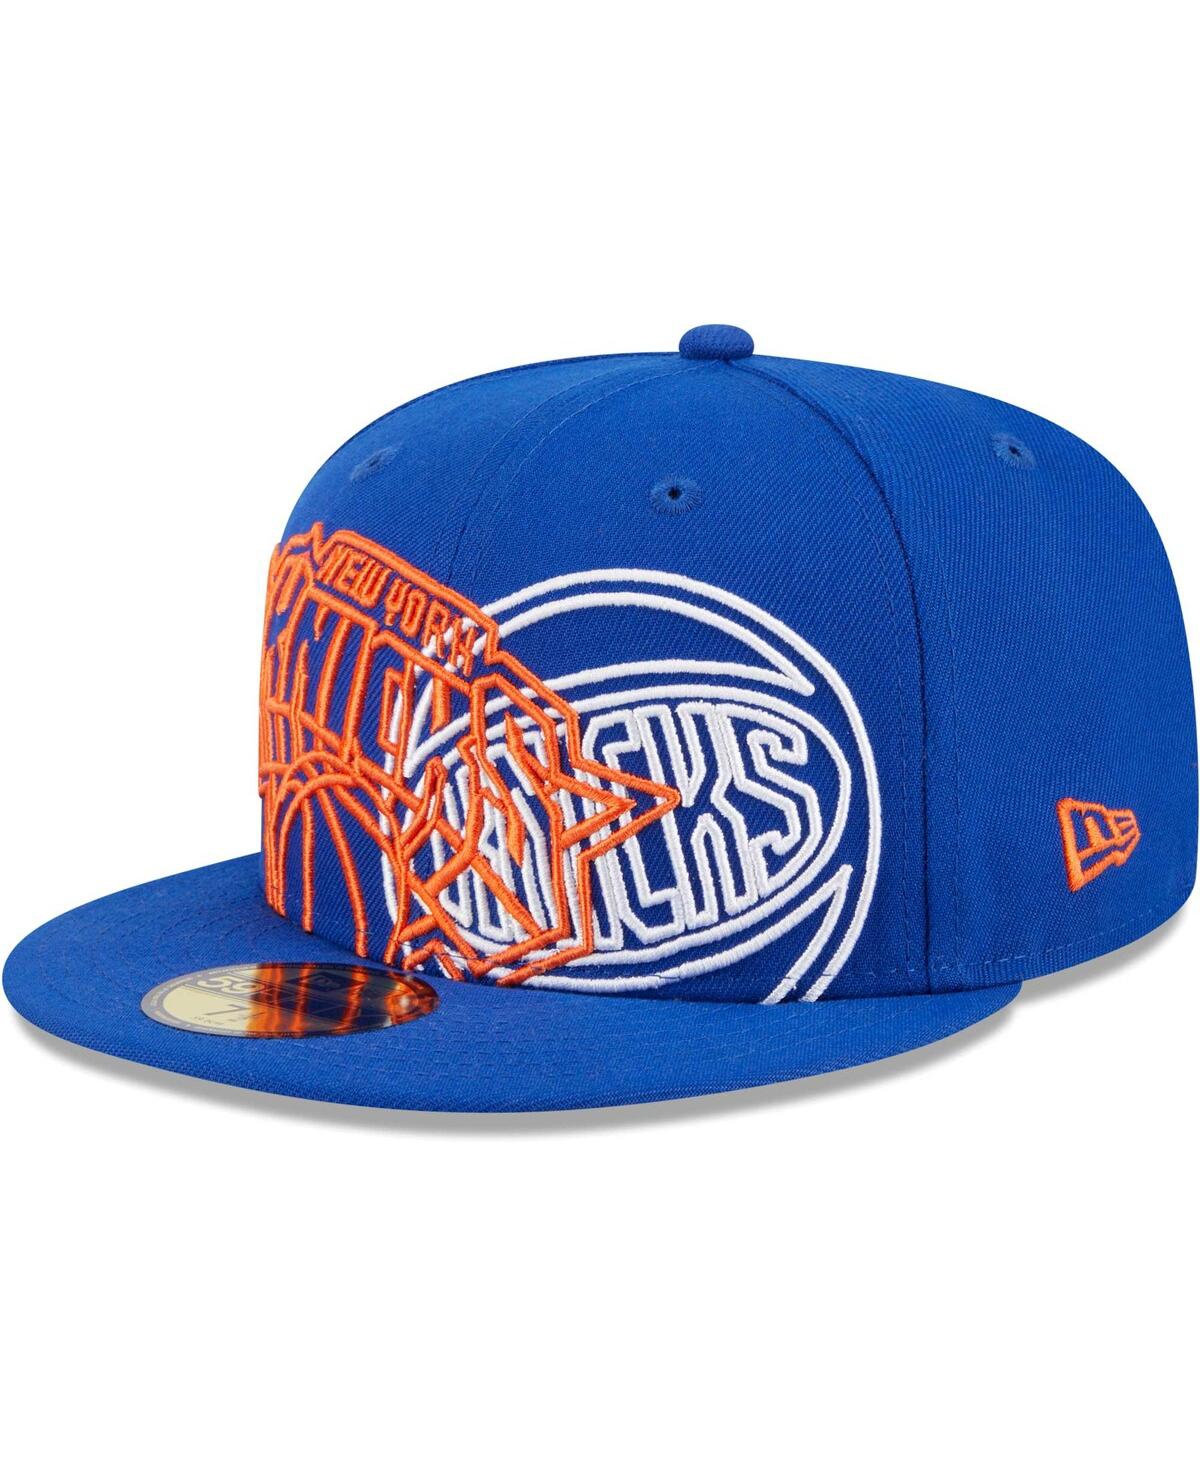 Shop New Era Men's  Blue New York Knicks Game Day Hollow Logo Mashup 59fifty Fitted Hat